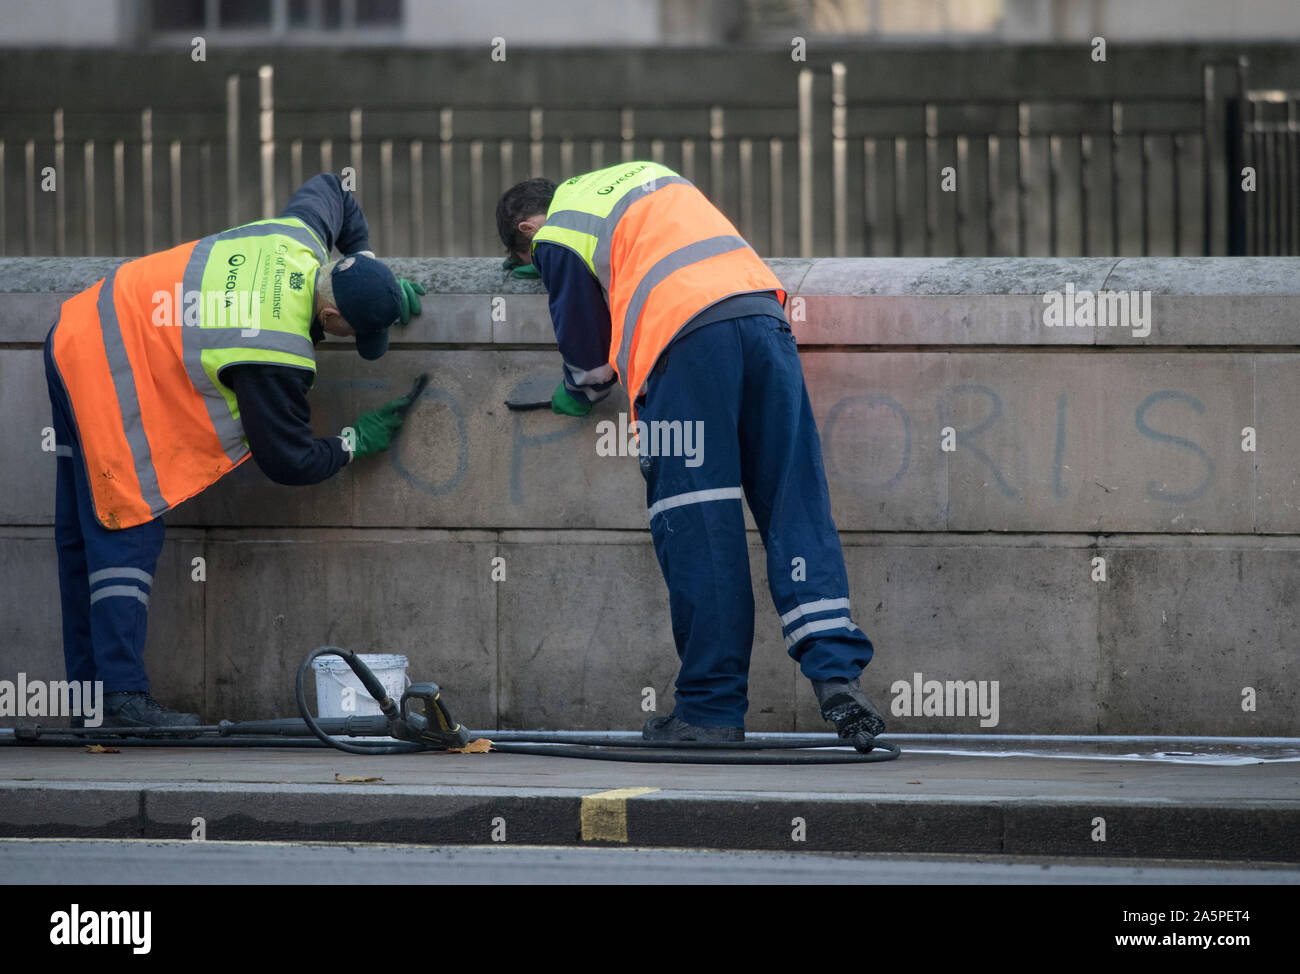 Downing Street, London, UK. 22nd October 2019. As Ministers arrive in Downing Street for weekly Cabinet, cleaners in Whitehall directly across from Downing Street entrance attempt to clean ‘Stop Boris’ graffiti from a wall. Credit: Malcolm Park/Alamy Live News. Stock Photo